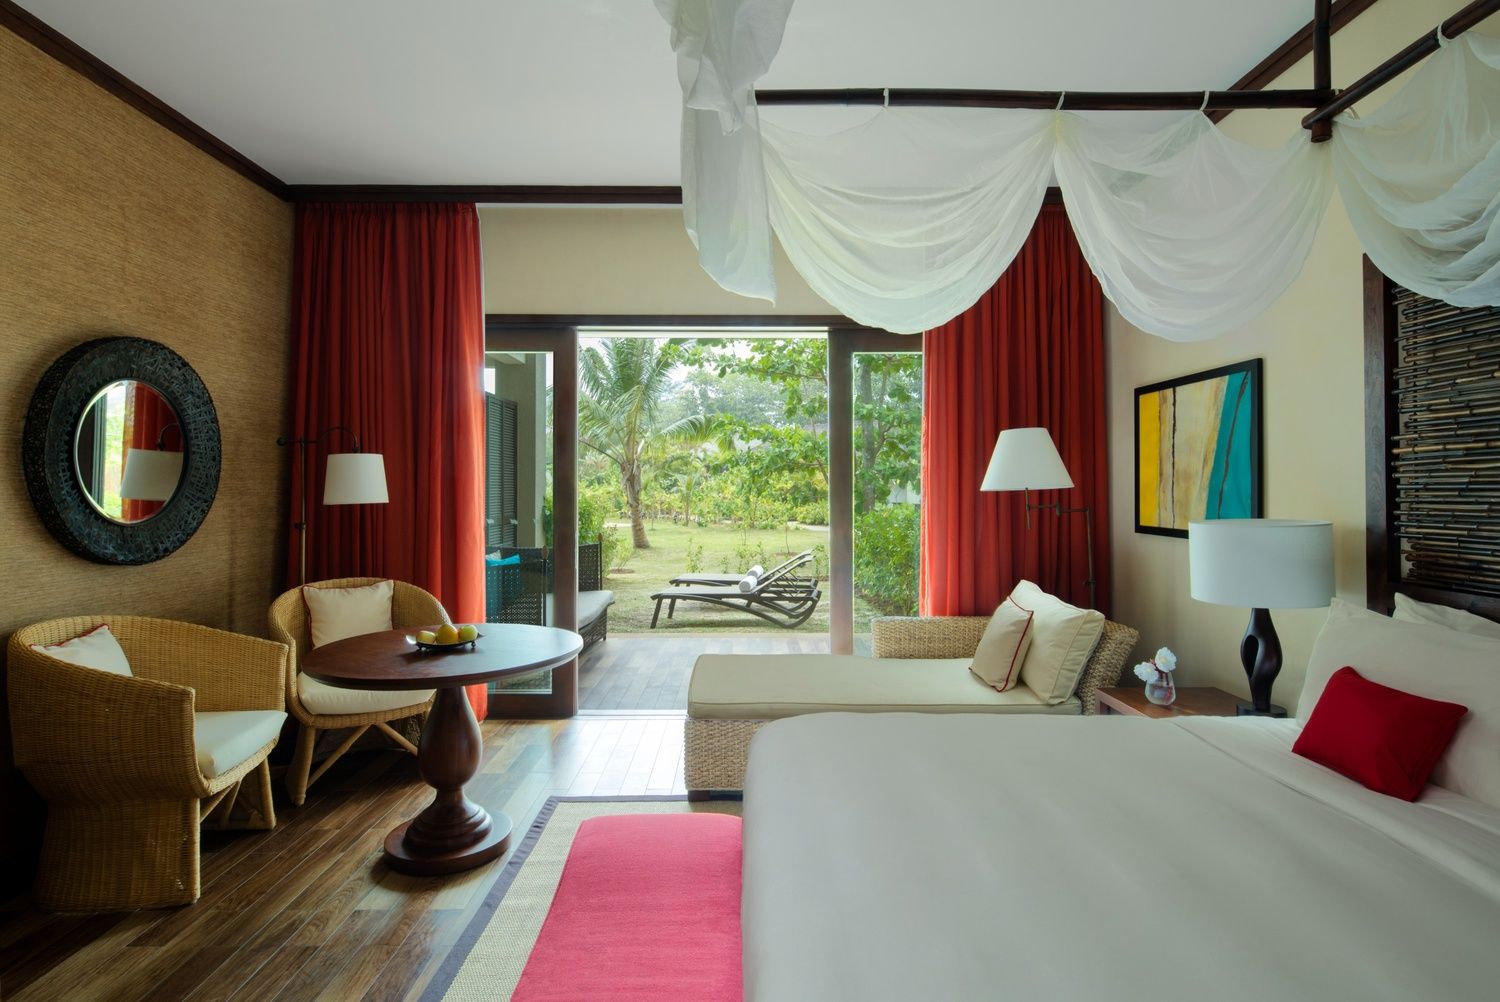 Luxurious resort suite in Seychelles with elegant furnishings, a wide bed with a sheer canopy, and floor-to-ceiling windows offering views of the lush outdoor landscape.